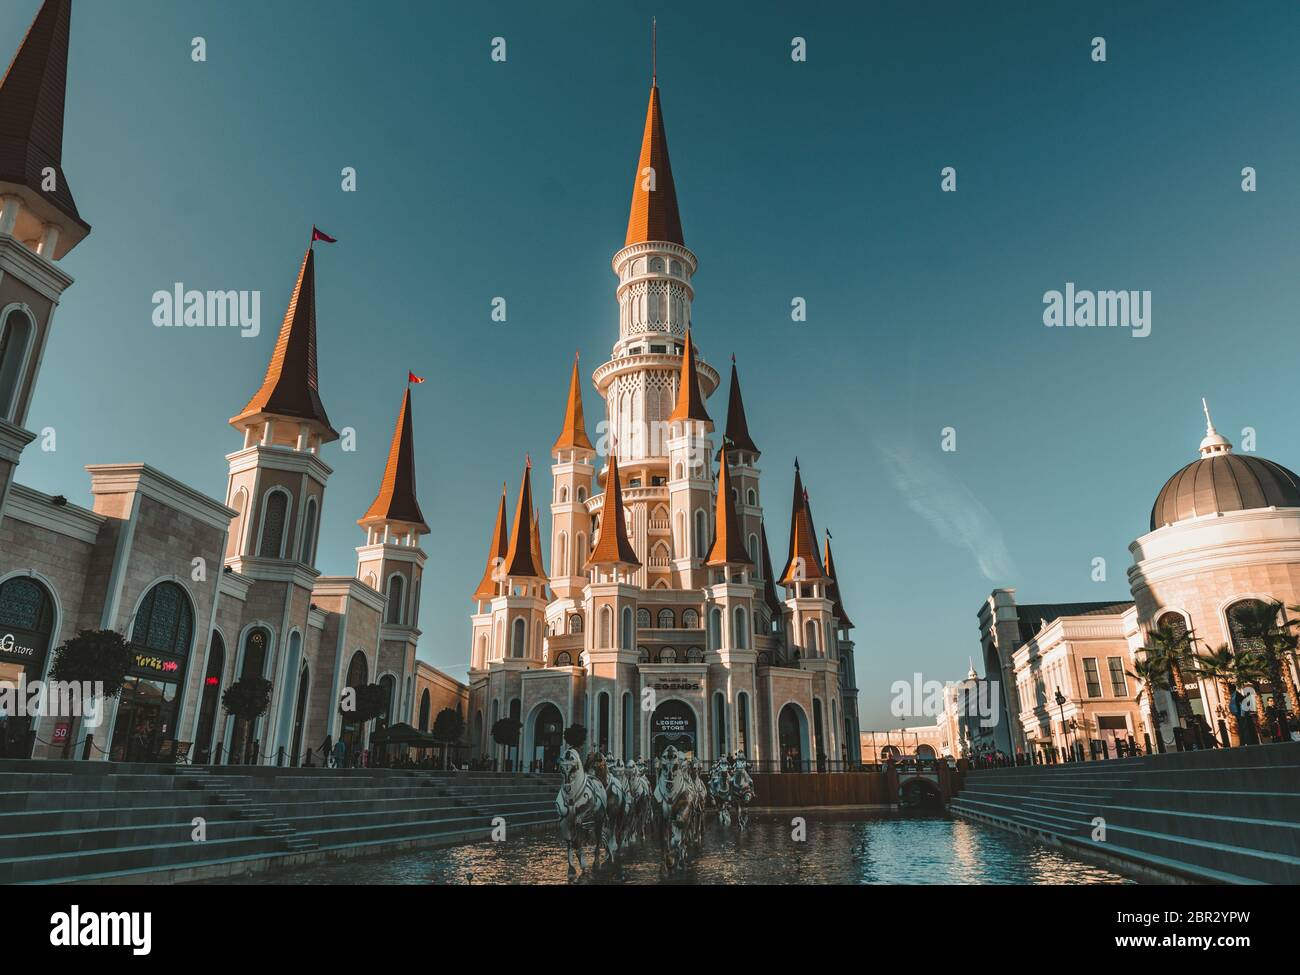 Antalya, Turkey - 1st December 2018: Main castle and pool with statues in Land of Legends theme mall. A very big shopping mall and fun park. Stock Photo